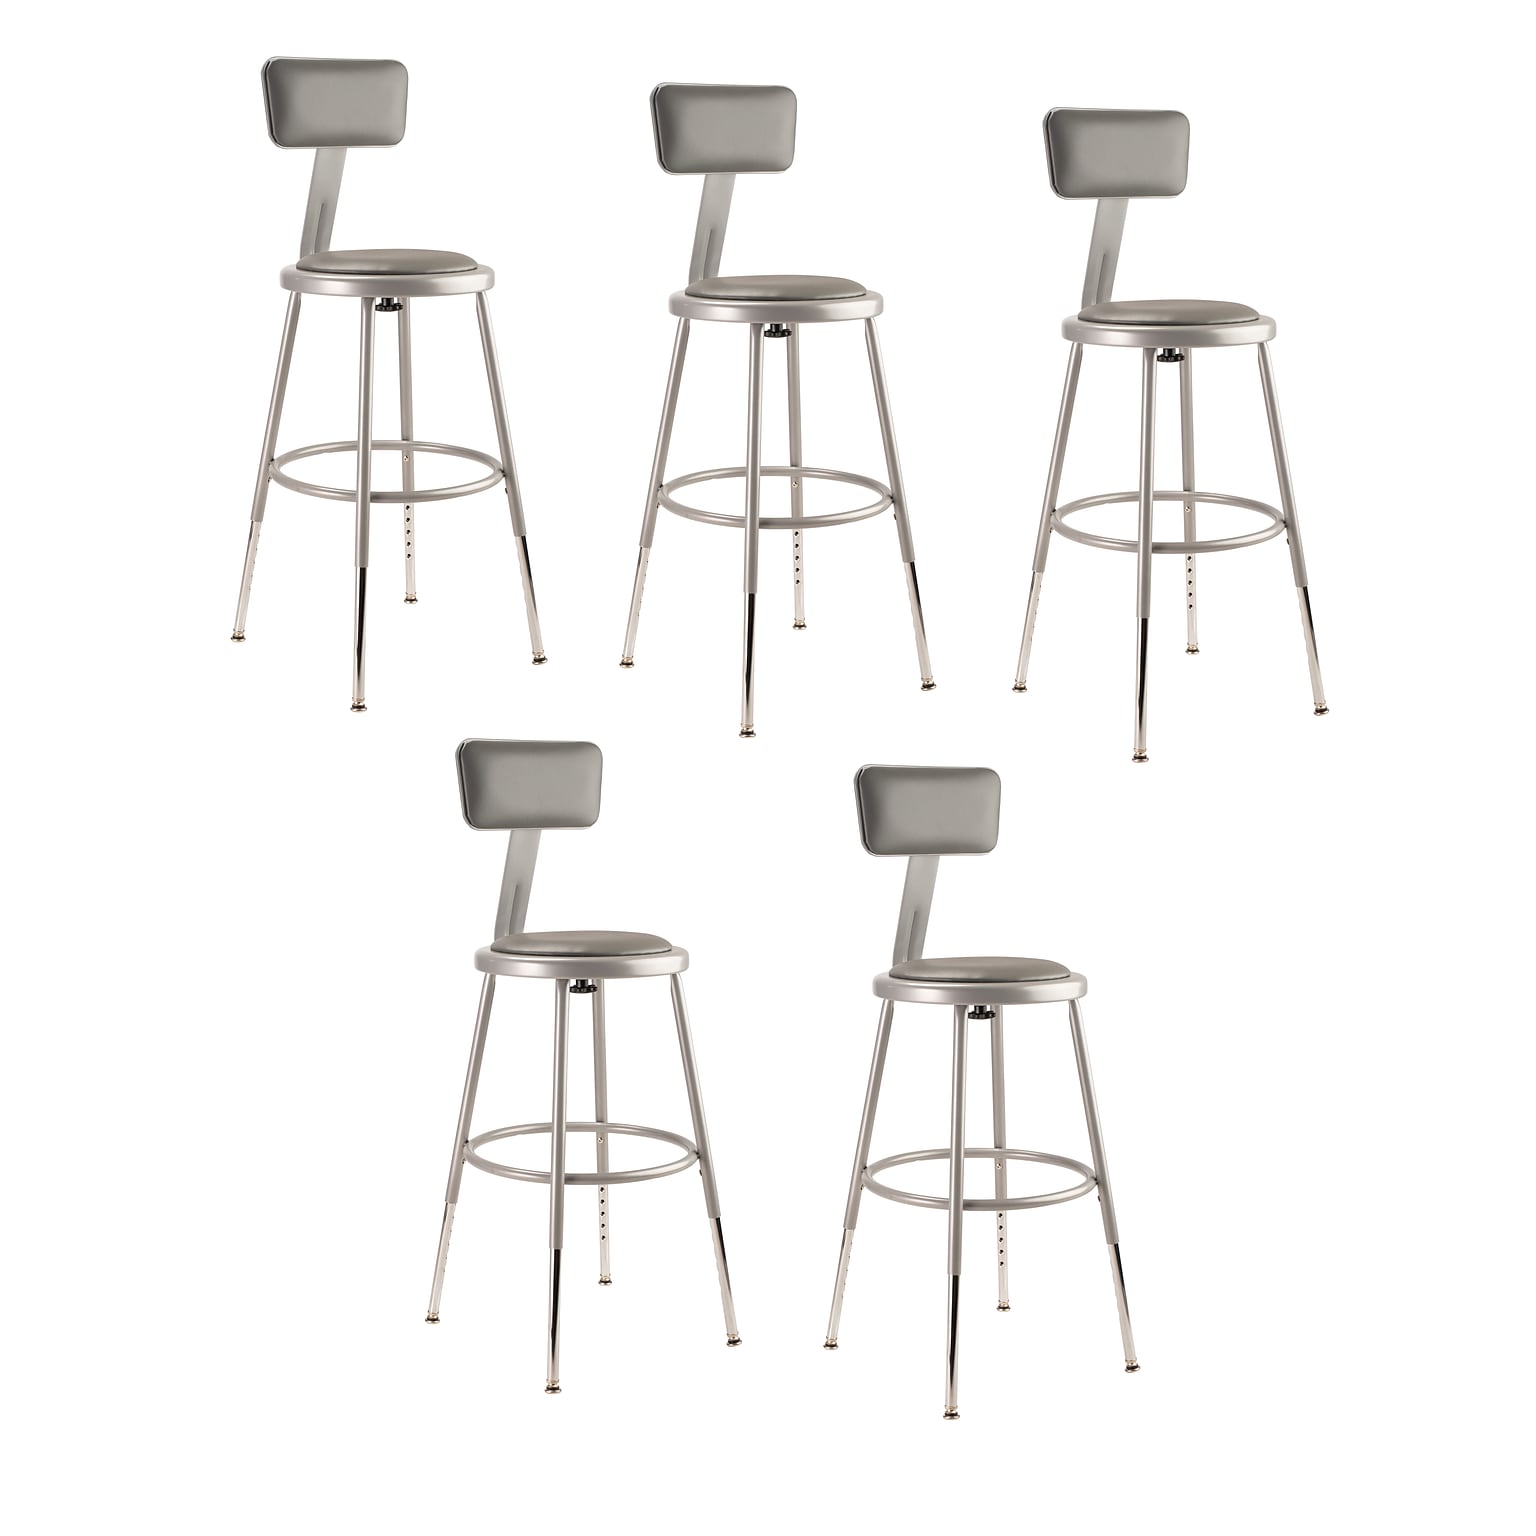 NPS 6400 Series Armless Vinyl Height Adjustable Padded 18 Inch Stool with Backrest, Gray , 5 Pack (6418HB/5)